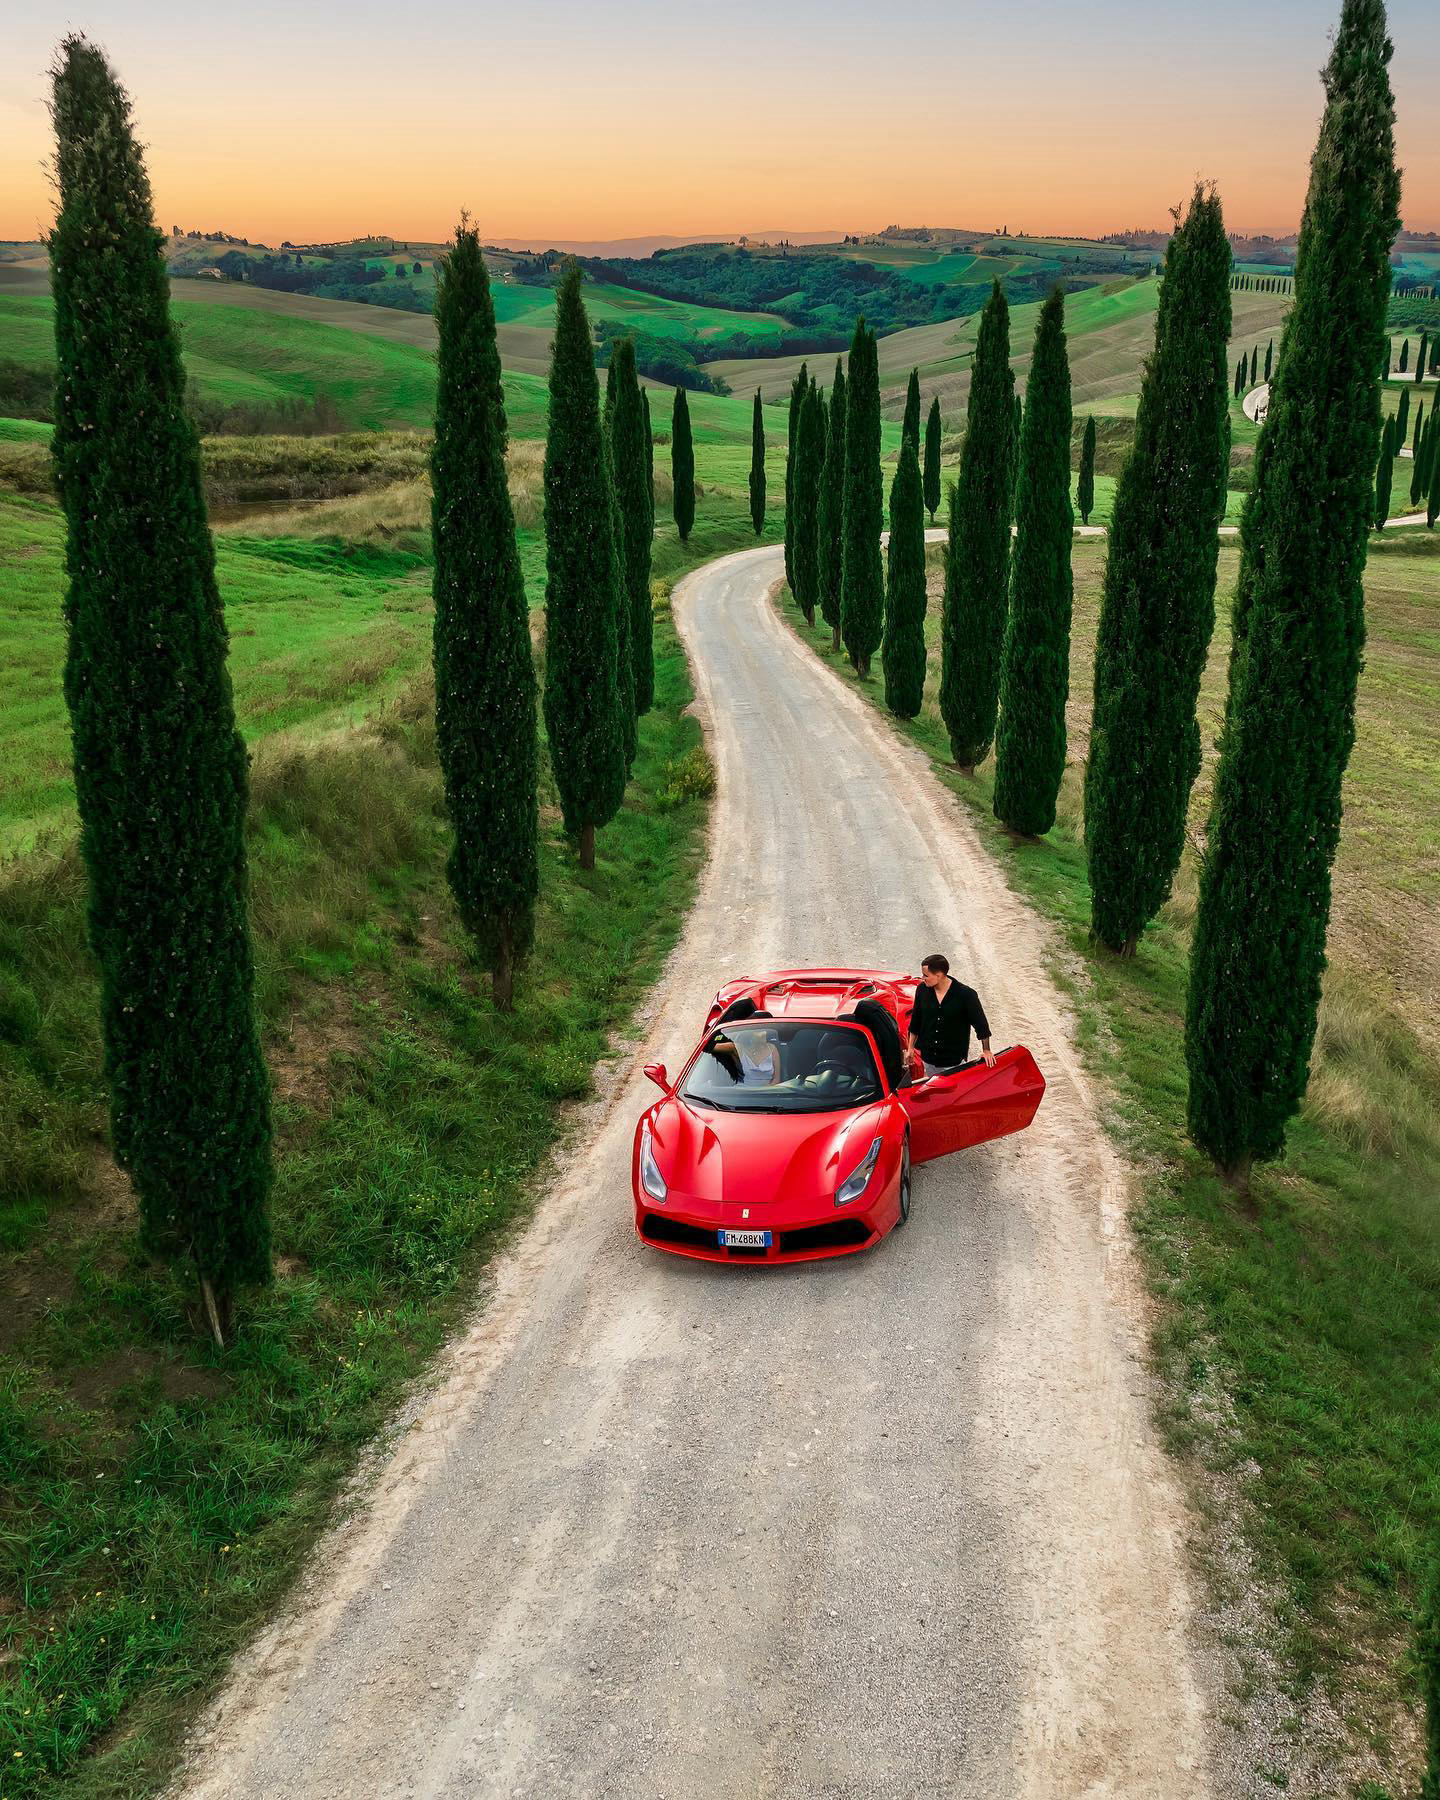 image  1 JEREMY AUSTIN - Exploring the magic of Tuscany with a curated itinerary and this stunning red Ferrar